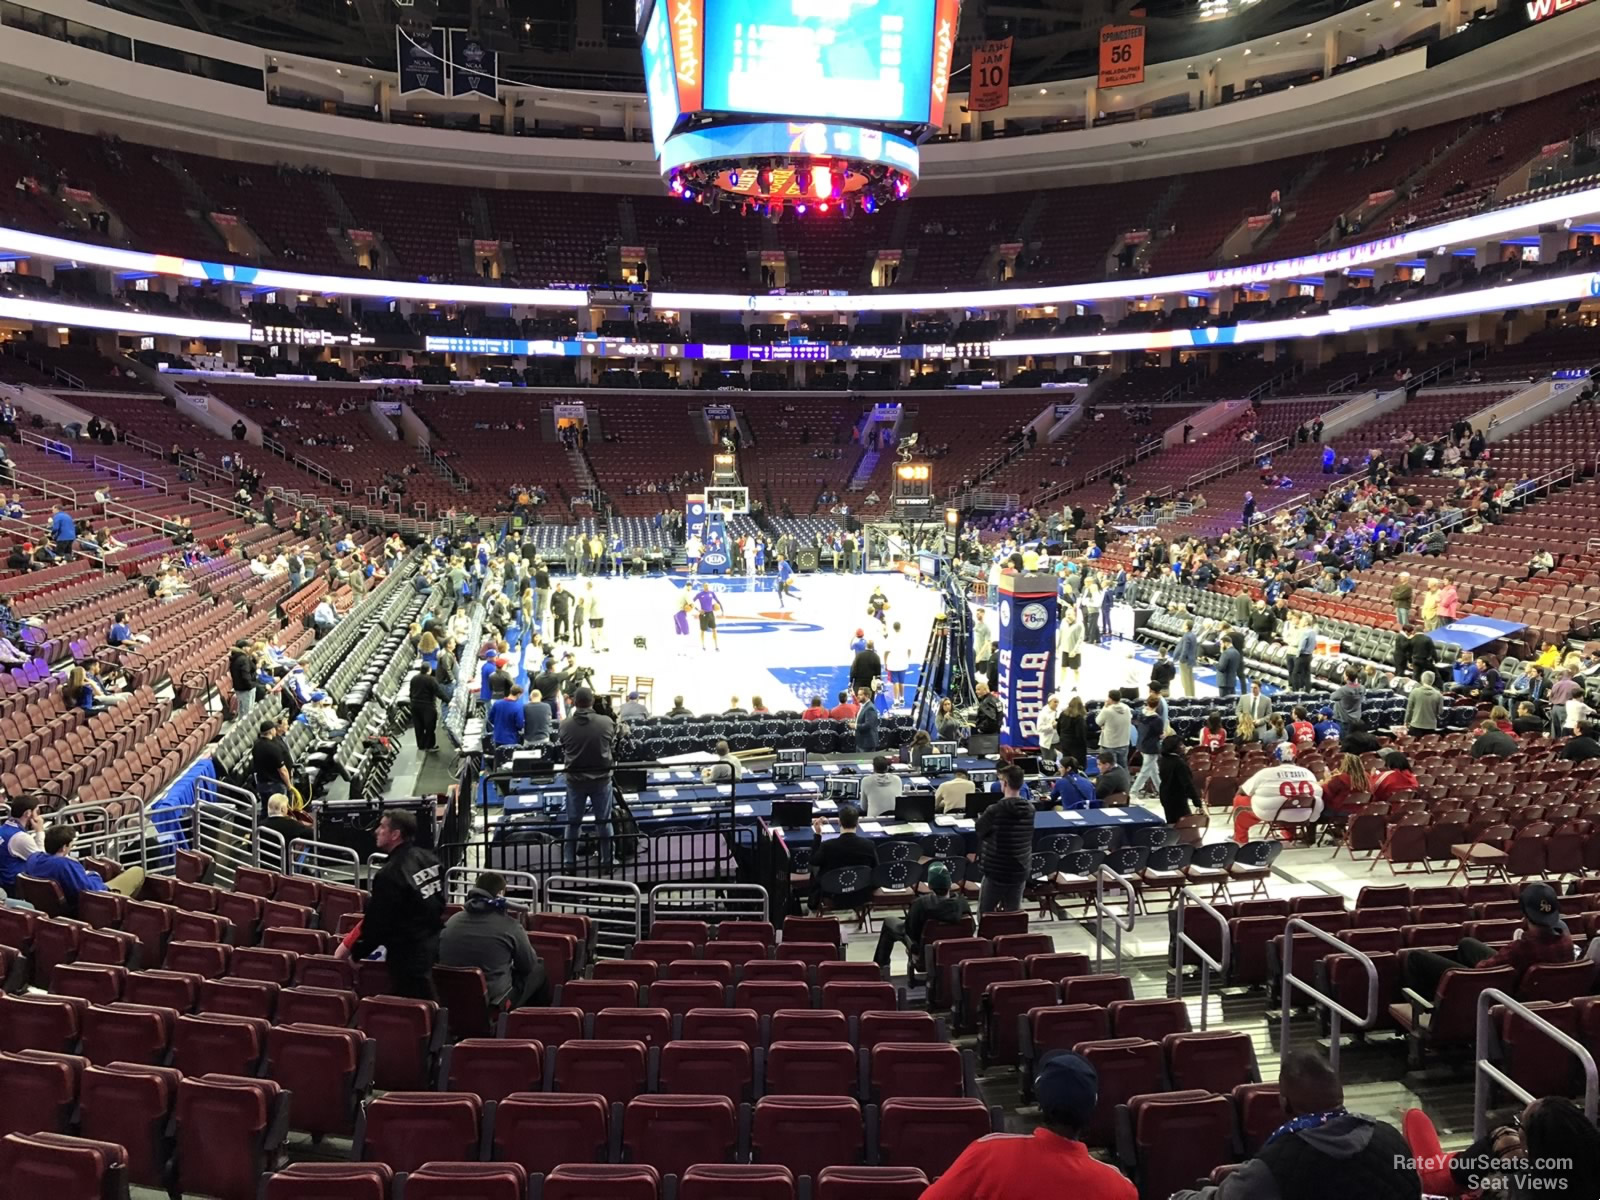 Section 118 at Wells Fargo Center 